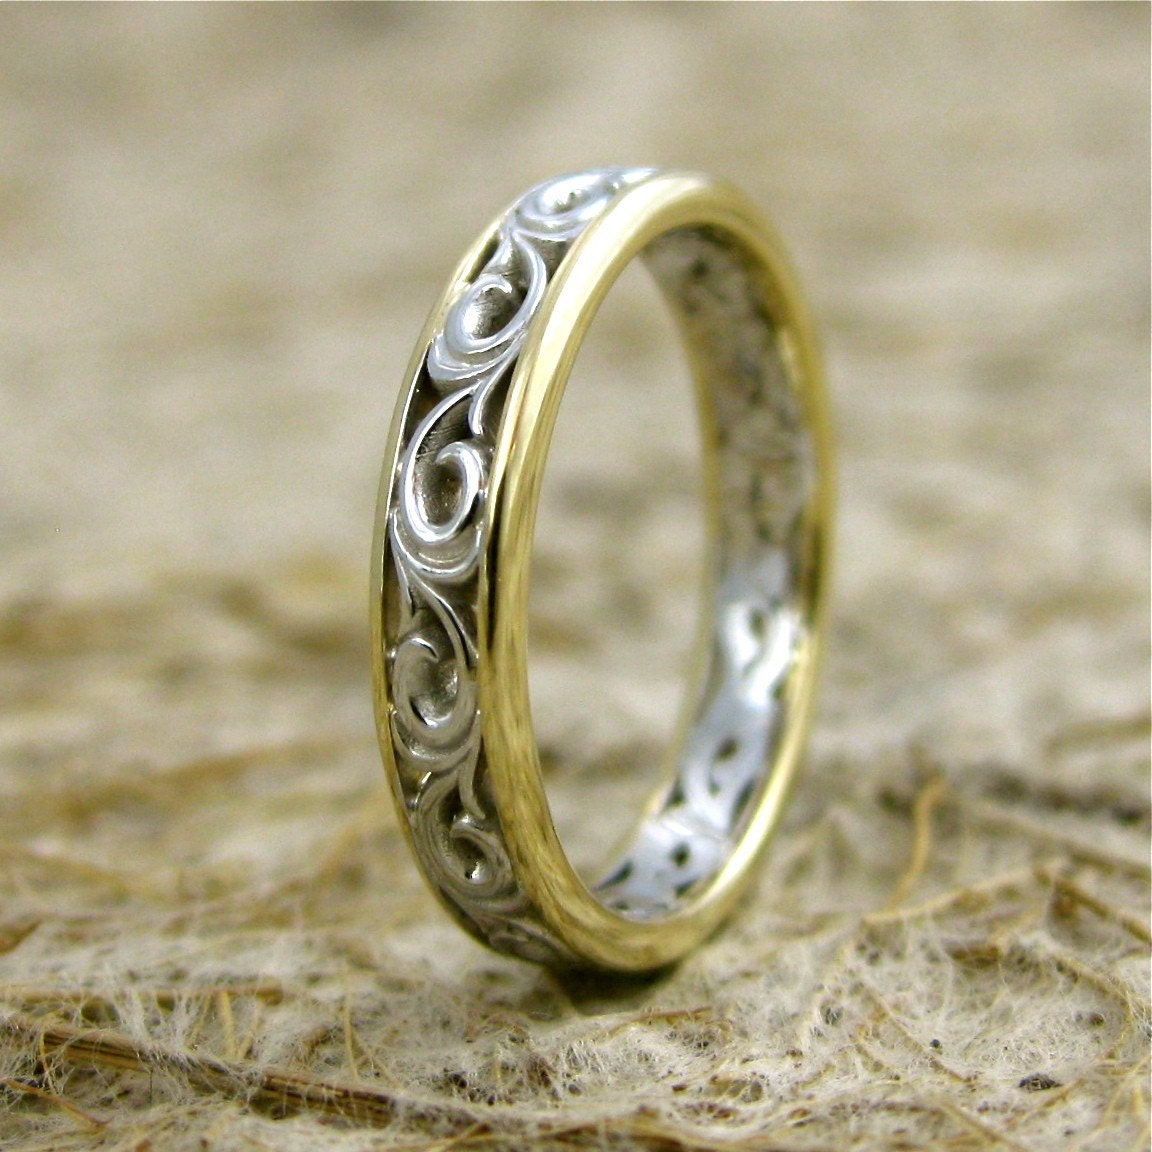 TwoTone 14K White and Yellow Gold Swirly Flower Patterned Wedding Band with